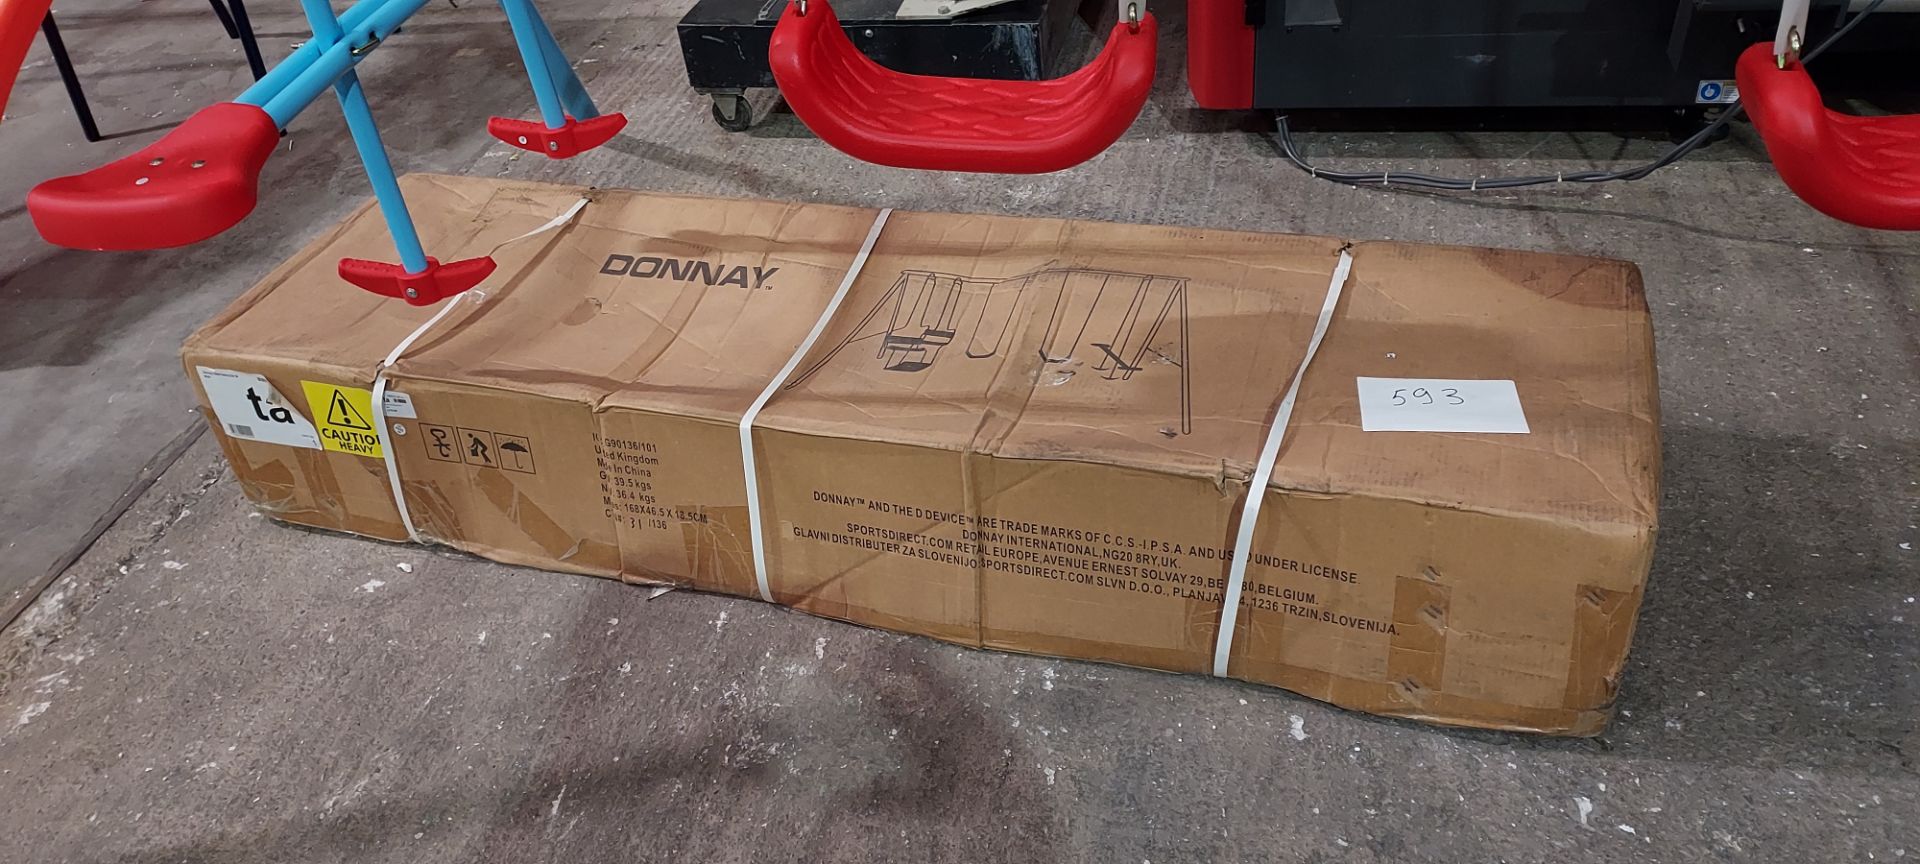 1 X BRAND NEW BOXED DONNAY ULTIMATE SWING SET - DOUBLE SWING - SEE-SAW AND CRADLE SWING - IN BLUE - Image 2 of 2